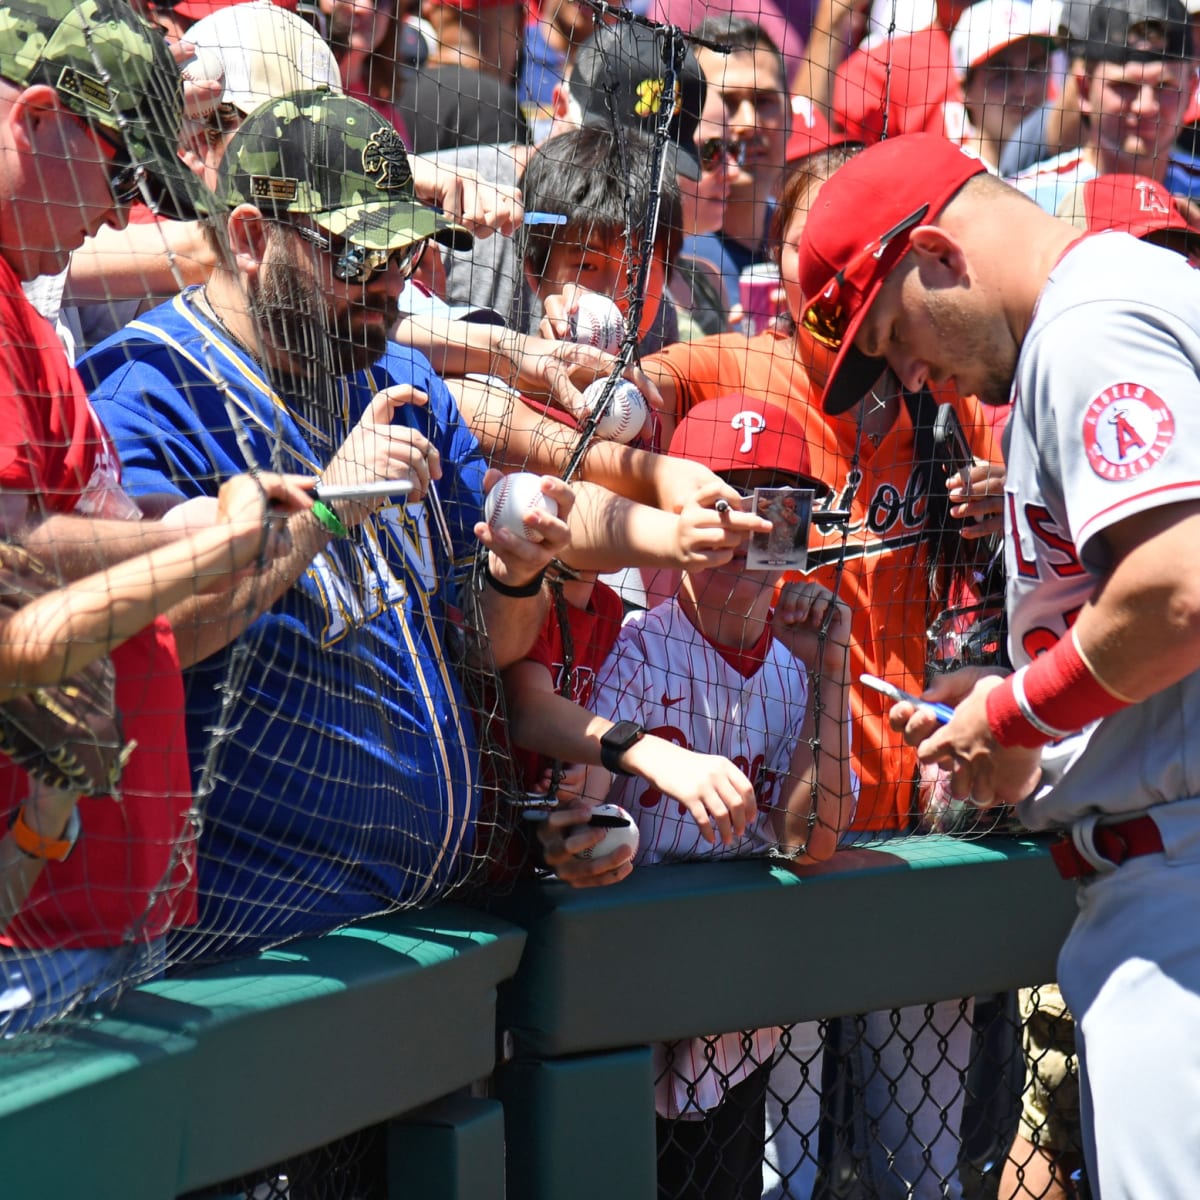 Boy from Corsicana gets to meet MLB player Mike Trout